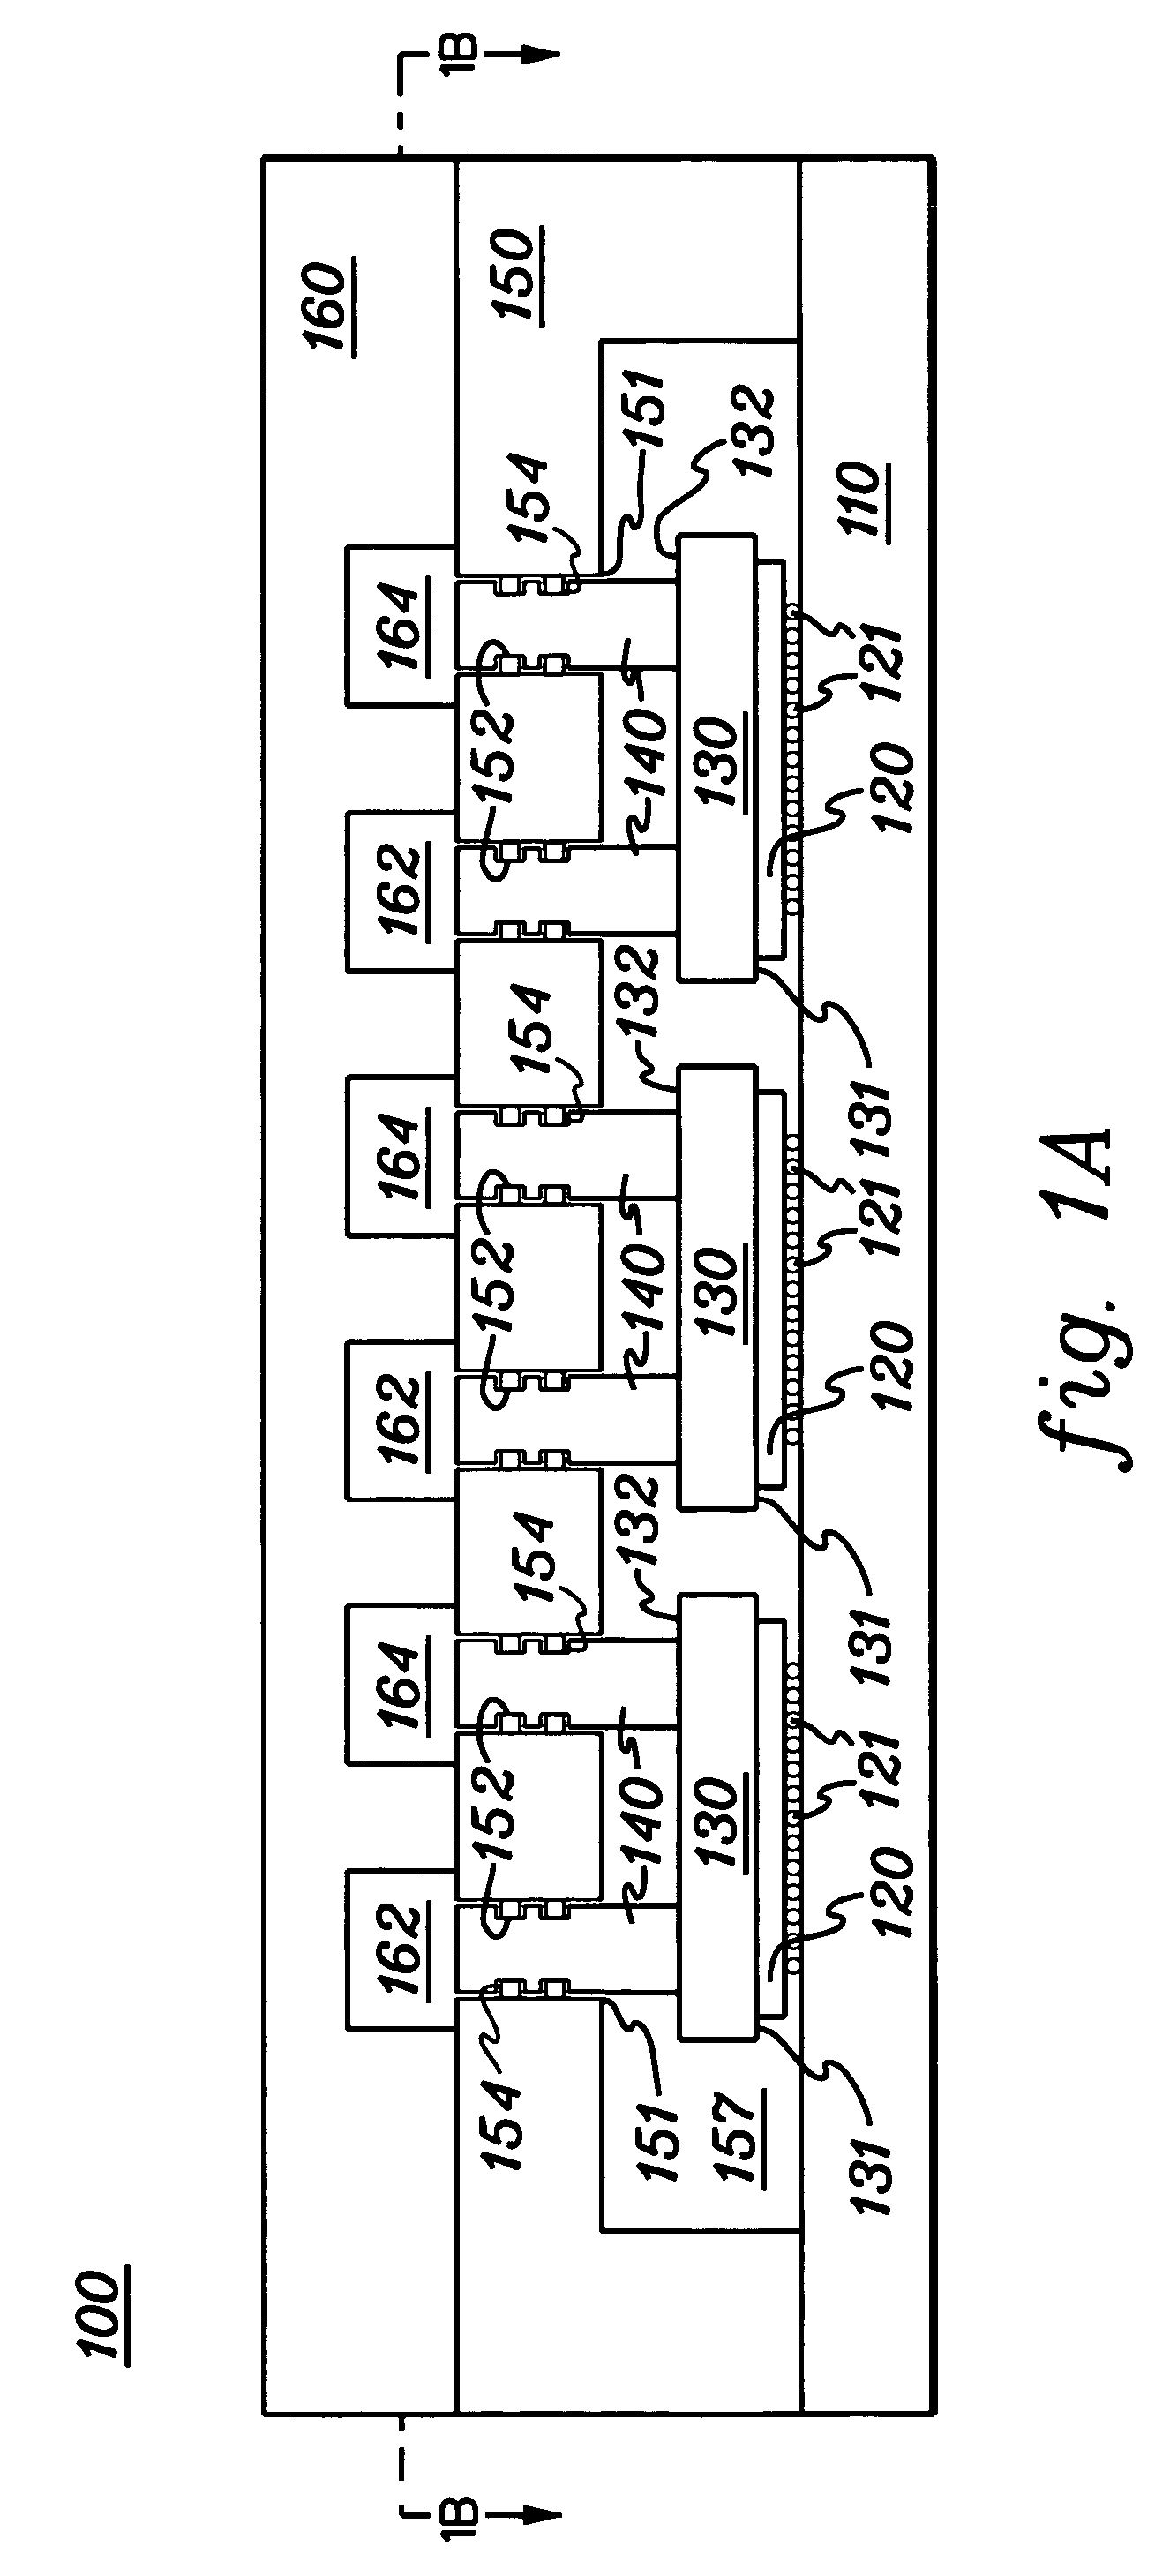 Cooling apparatus and method employing discrete cold plates disposed between a module enclosure and electronics components to be cooled